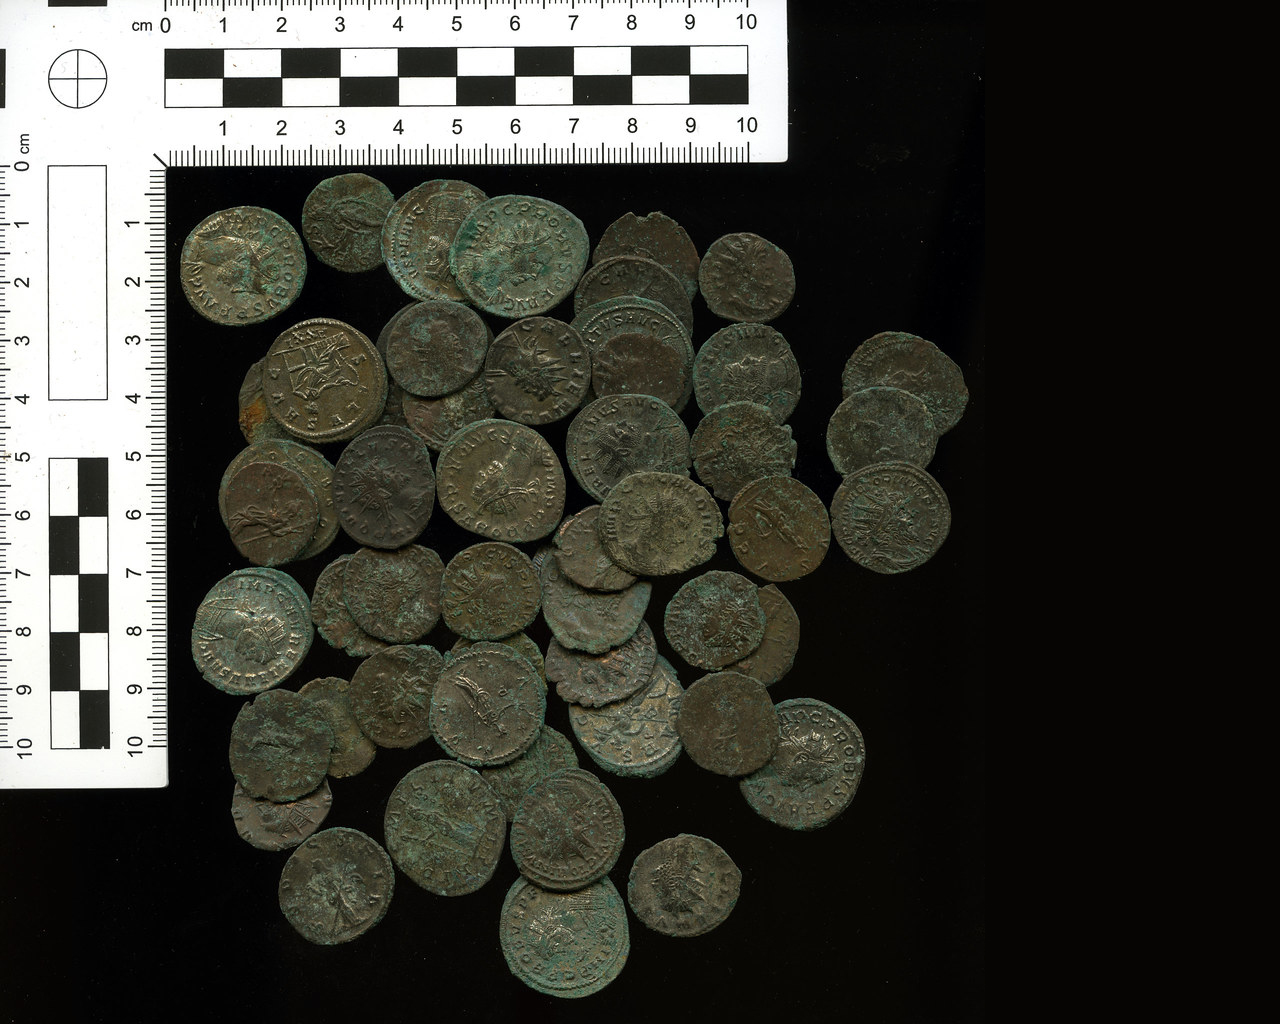 Upcoming Lecture: Ancient Coinage and the Portable Antiquities Scheme